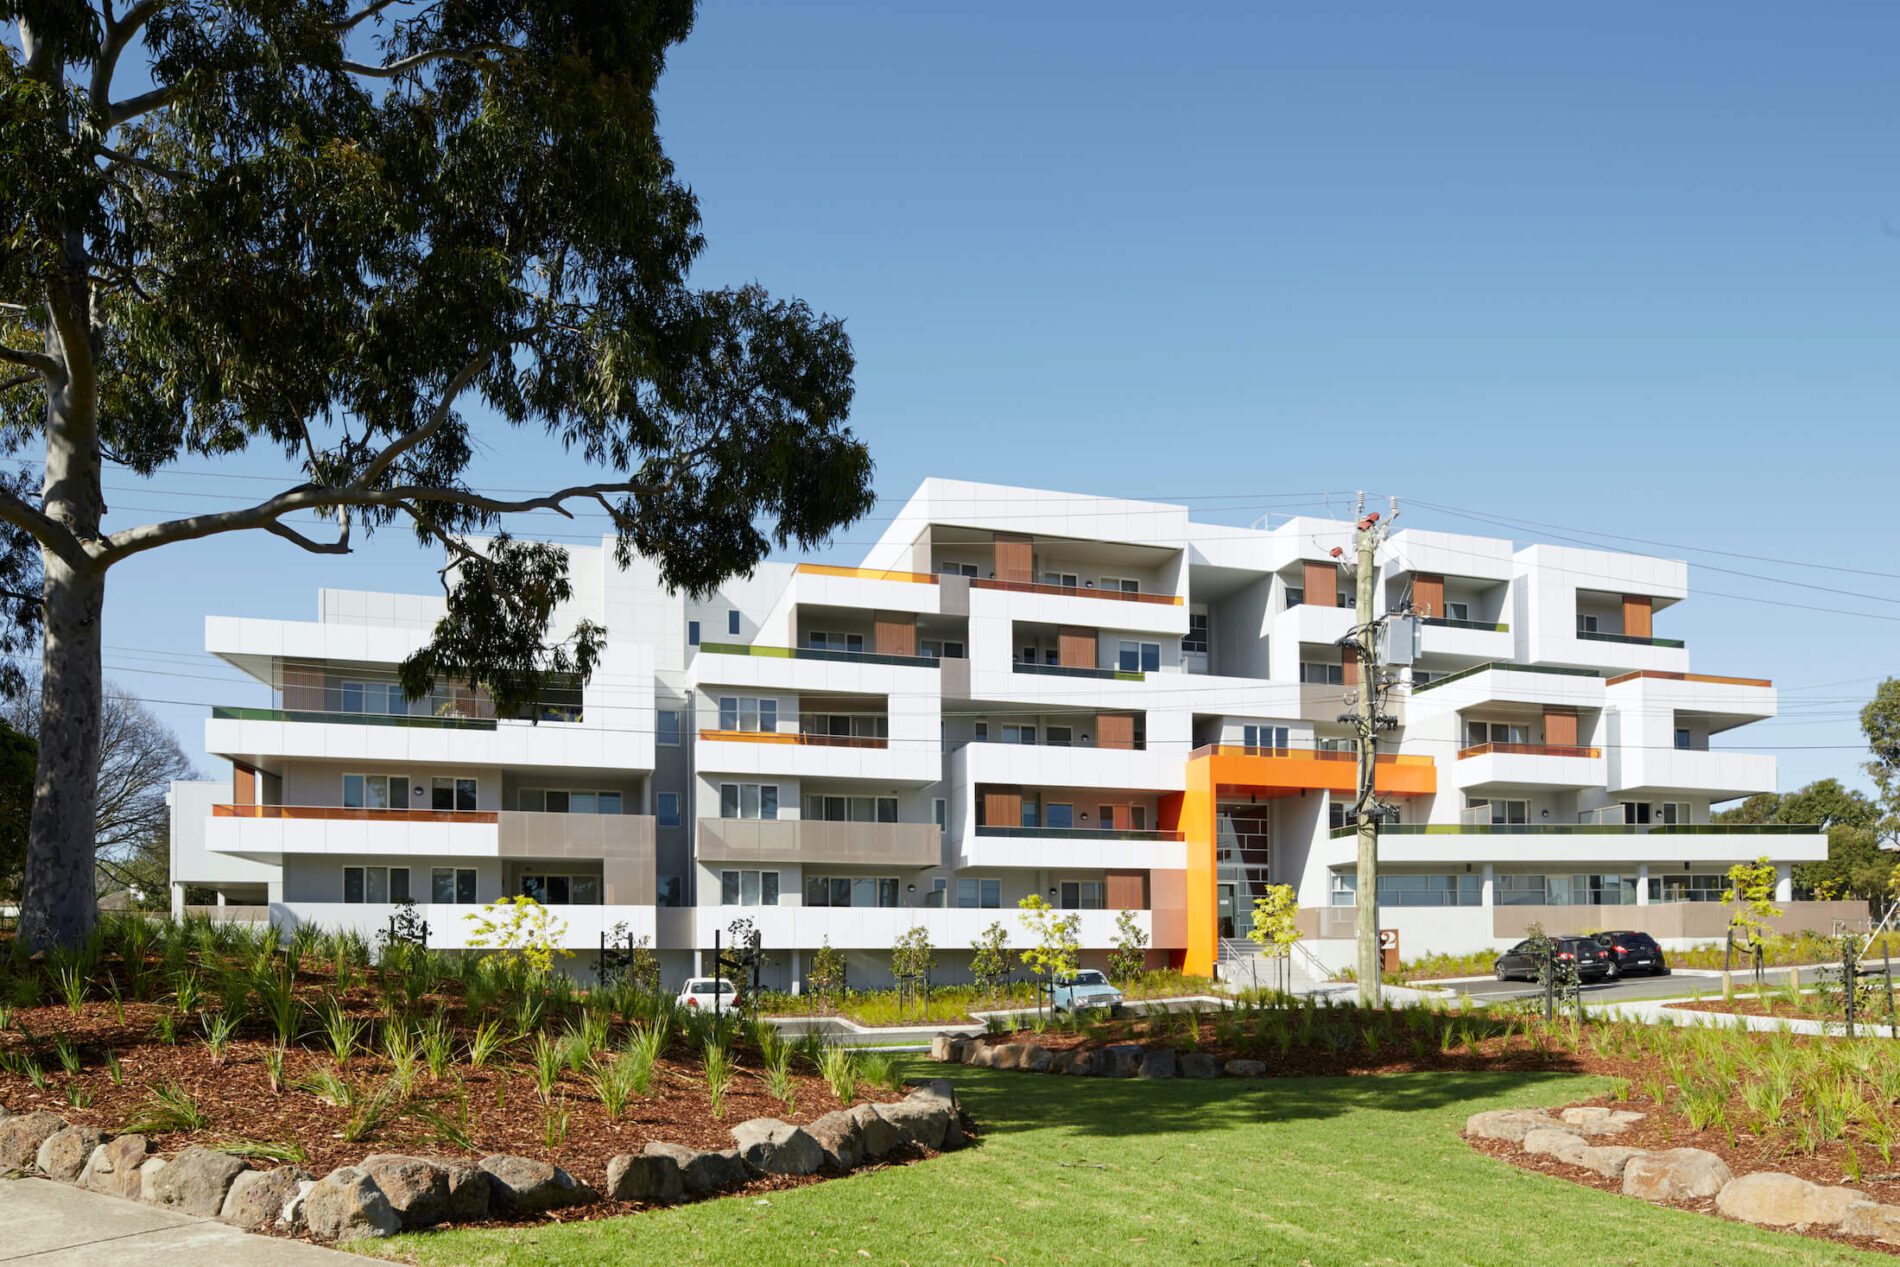 A white multi-storey apartment building with orange cladding feature elements, native landscaping and established gums out front